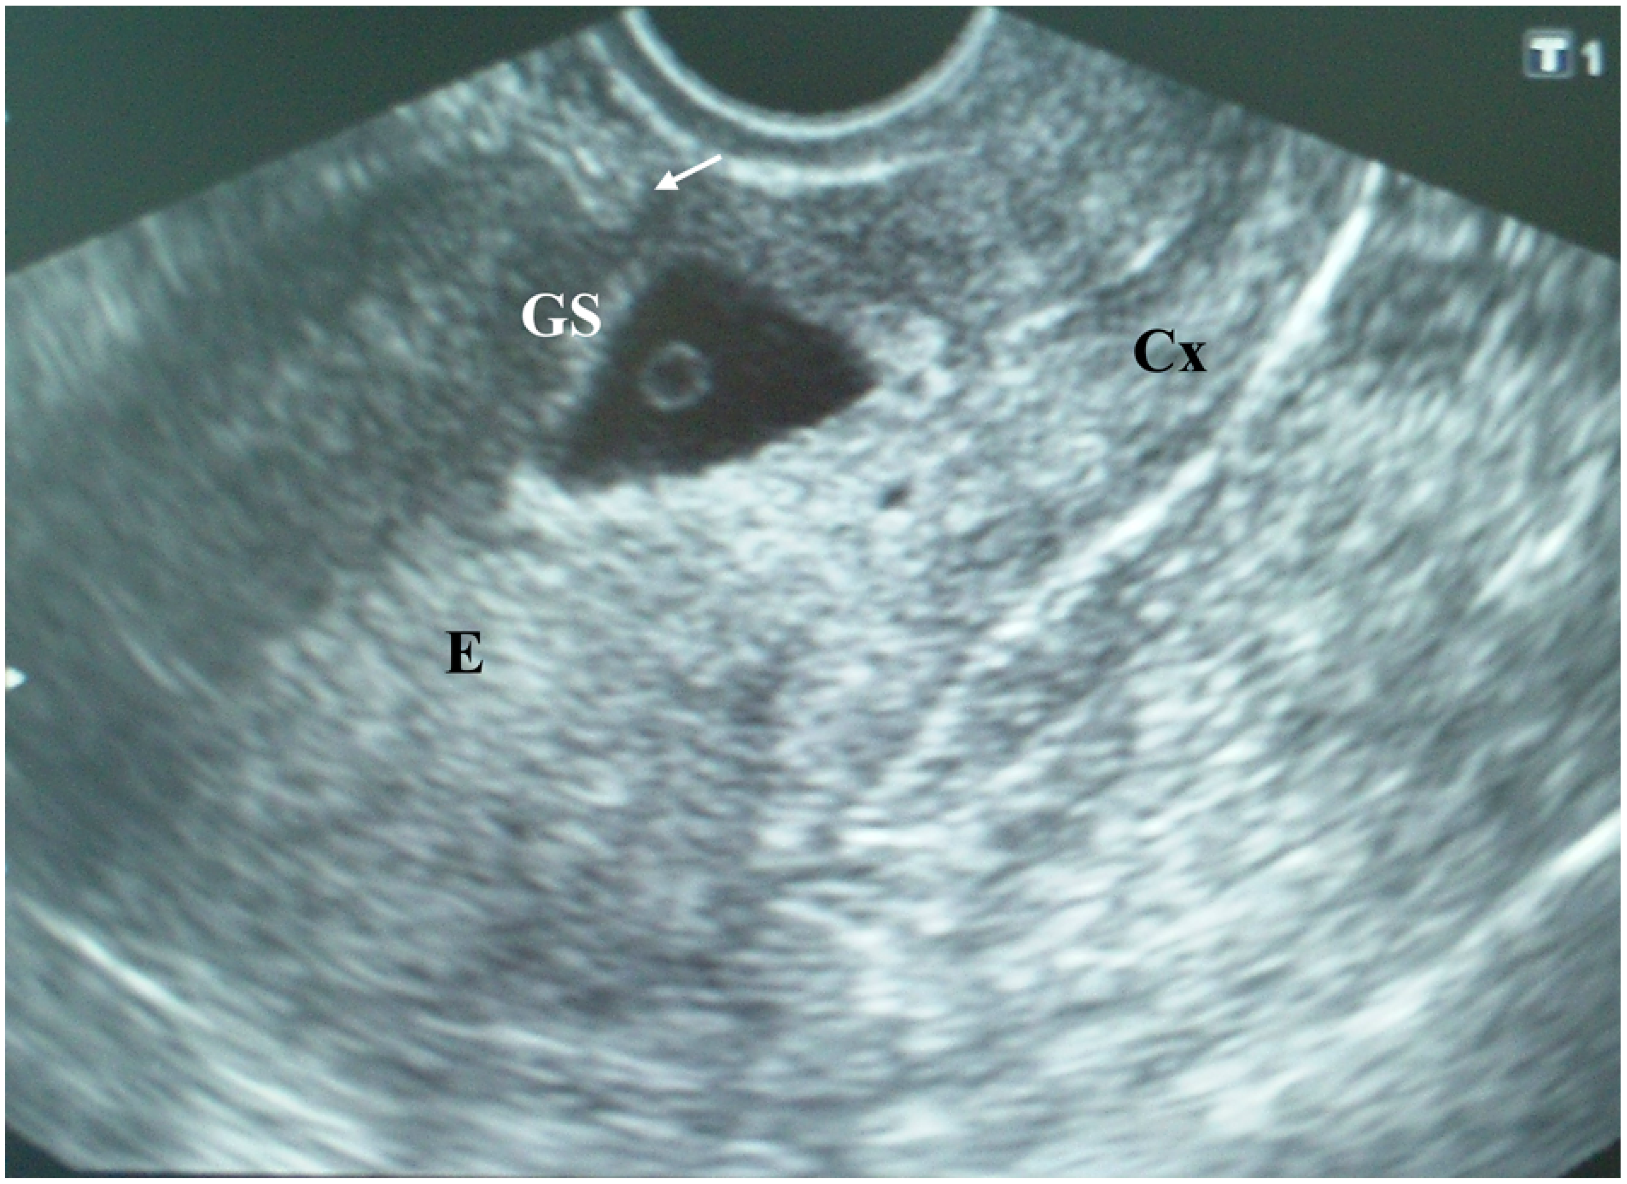 Gestational Sac in Pregnancy and Meaning If Empty